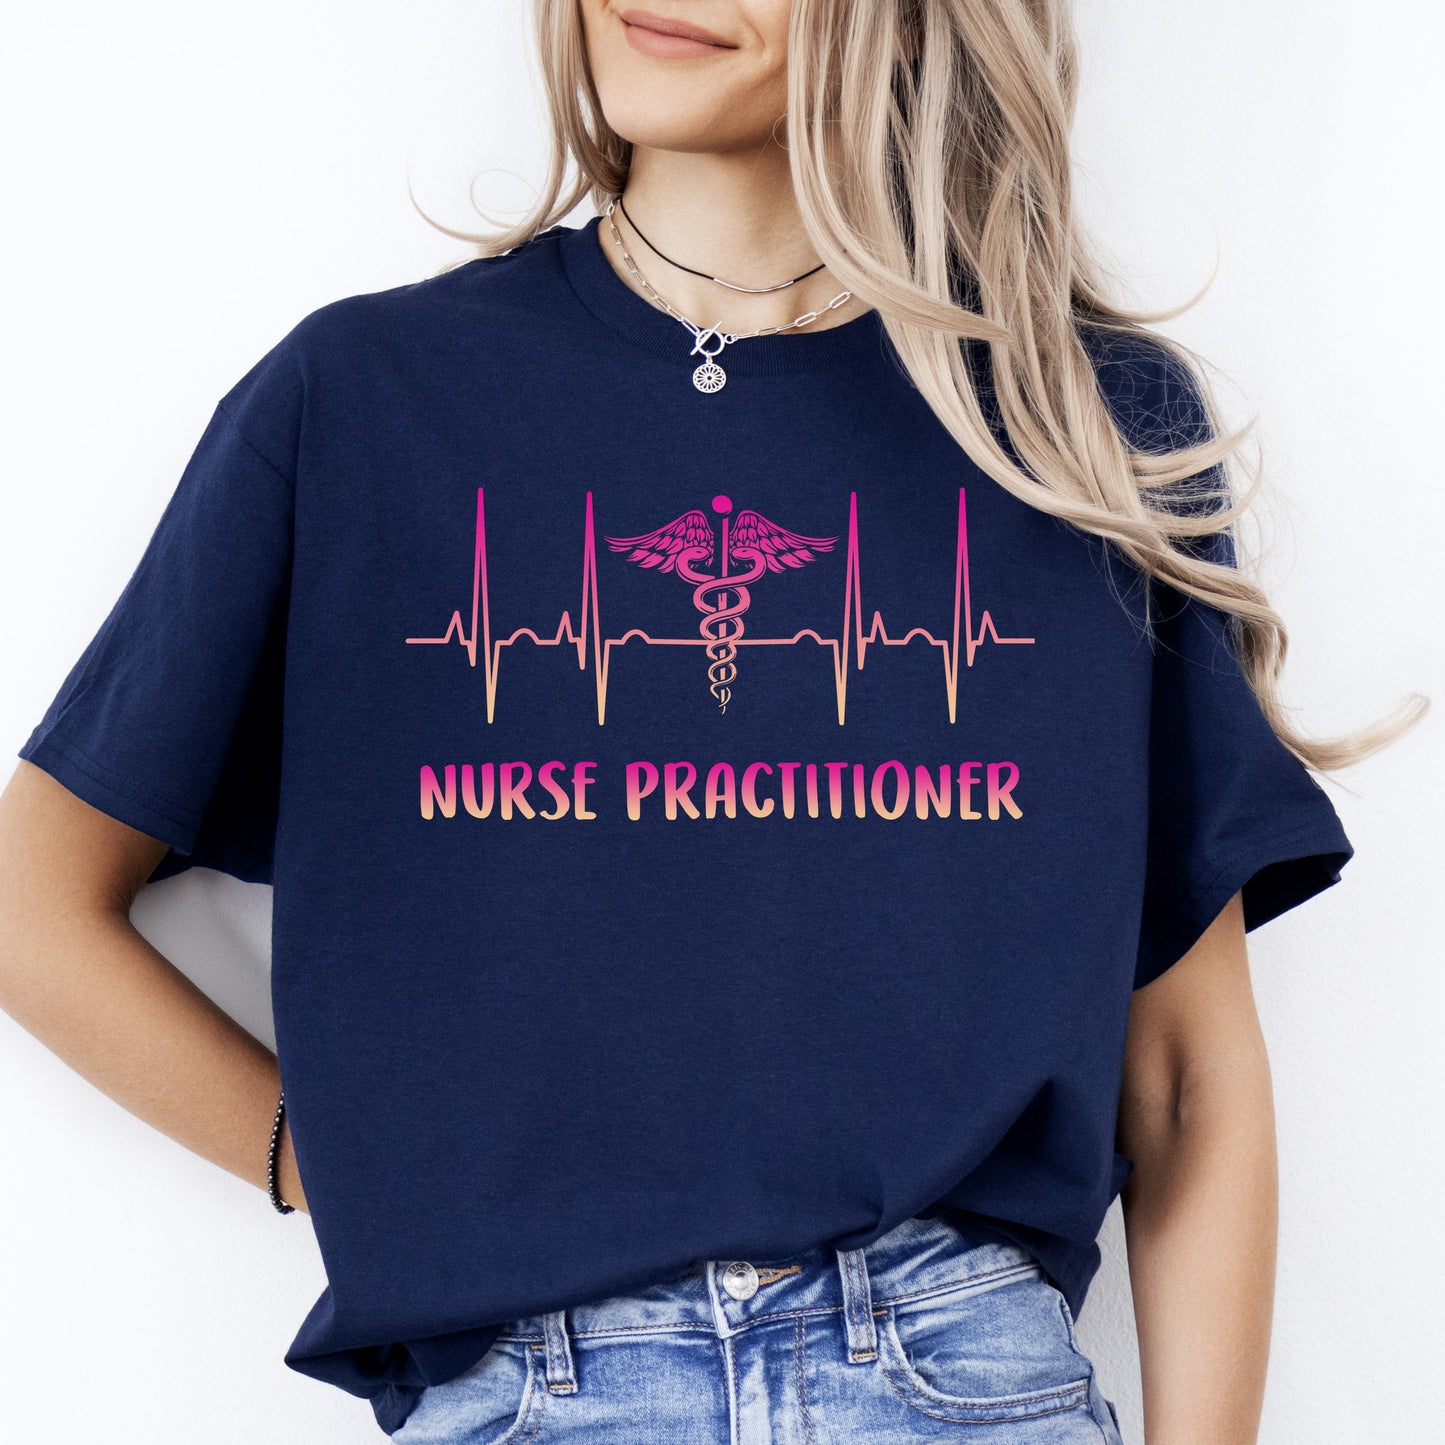 Nurse practitioner Heartbeat T-Shirt NP Family Nurse Practitioner heart beat Unisex Tee Black Navy Dark Heather-Navy-Family-Gift-Planet